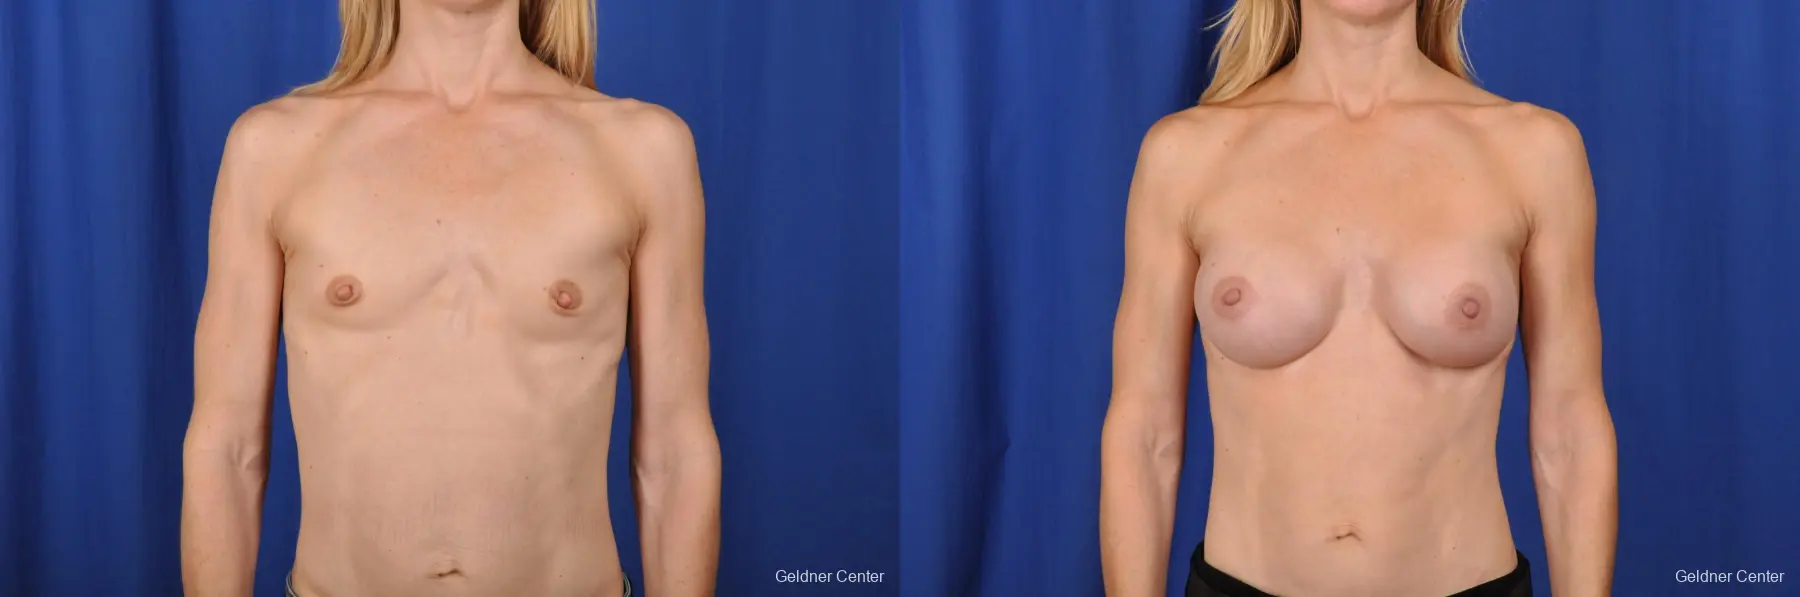 Chicago Breast Augmentation 2066 - Before and After